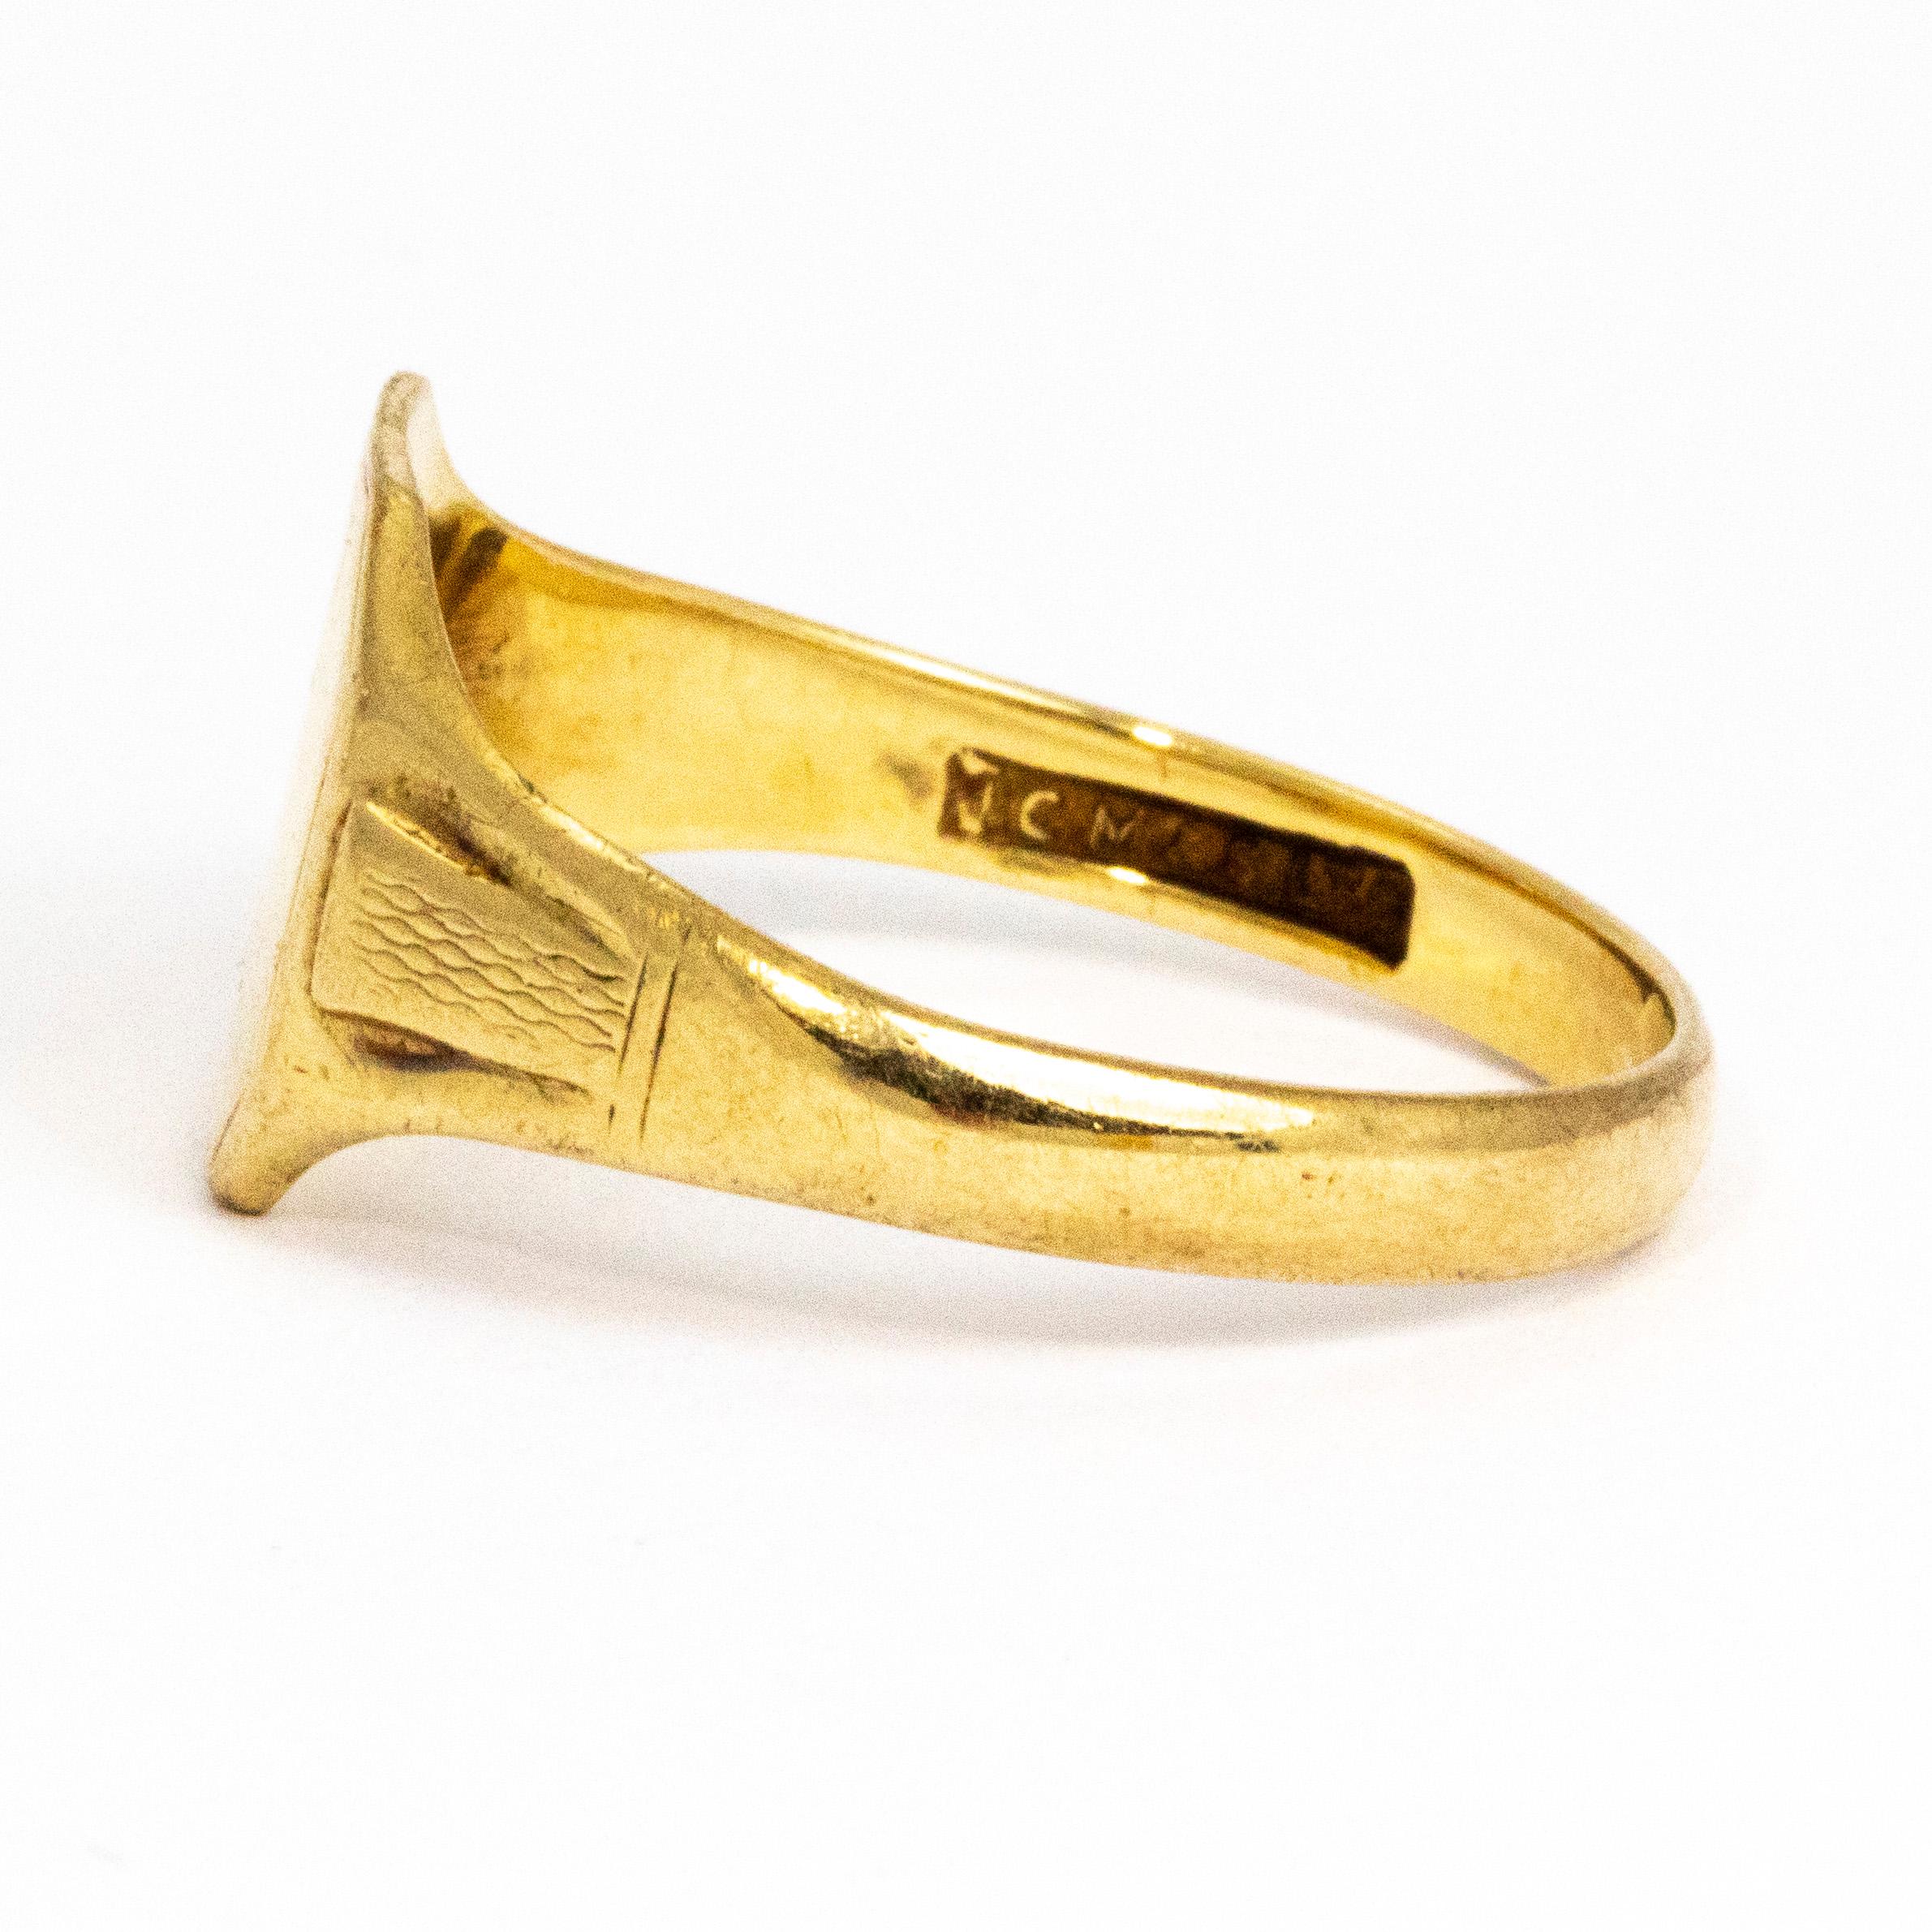 This lovely 9ct gold signet ring has some great detail. The Octagonal shape face on this ring has crisp edges and engraved like detail around it. The shoulders also have raised detail with engraving.

Ring Size: V or 10 1/2
Width At Widest Point: